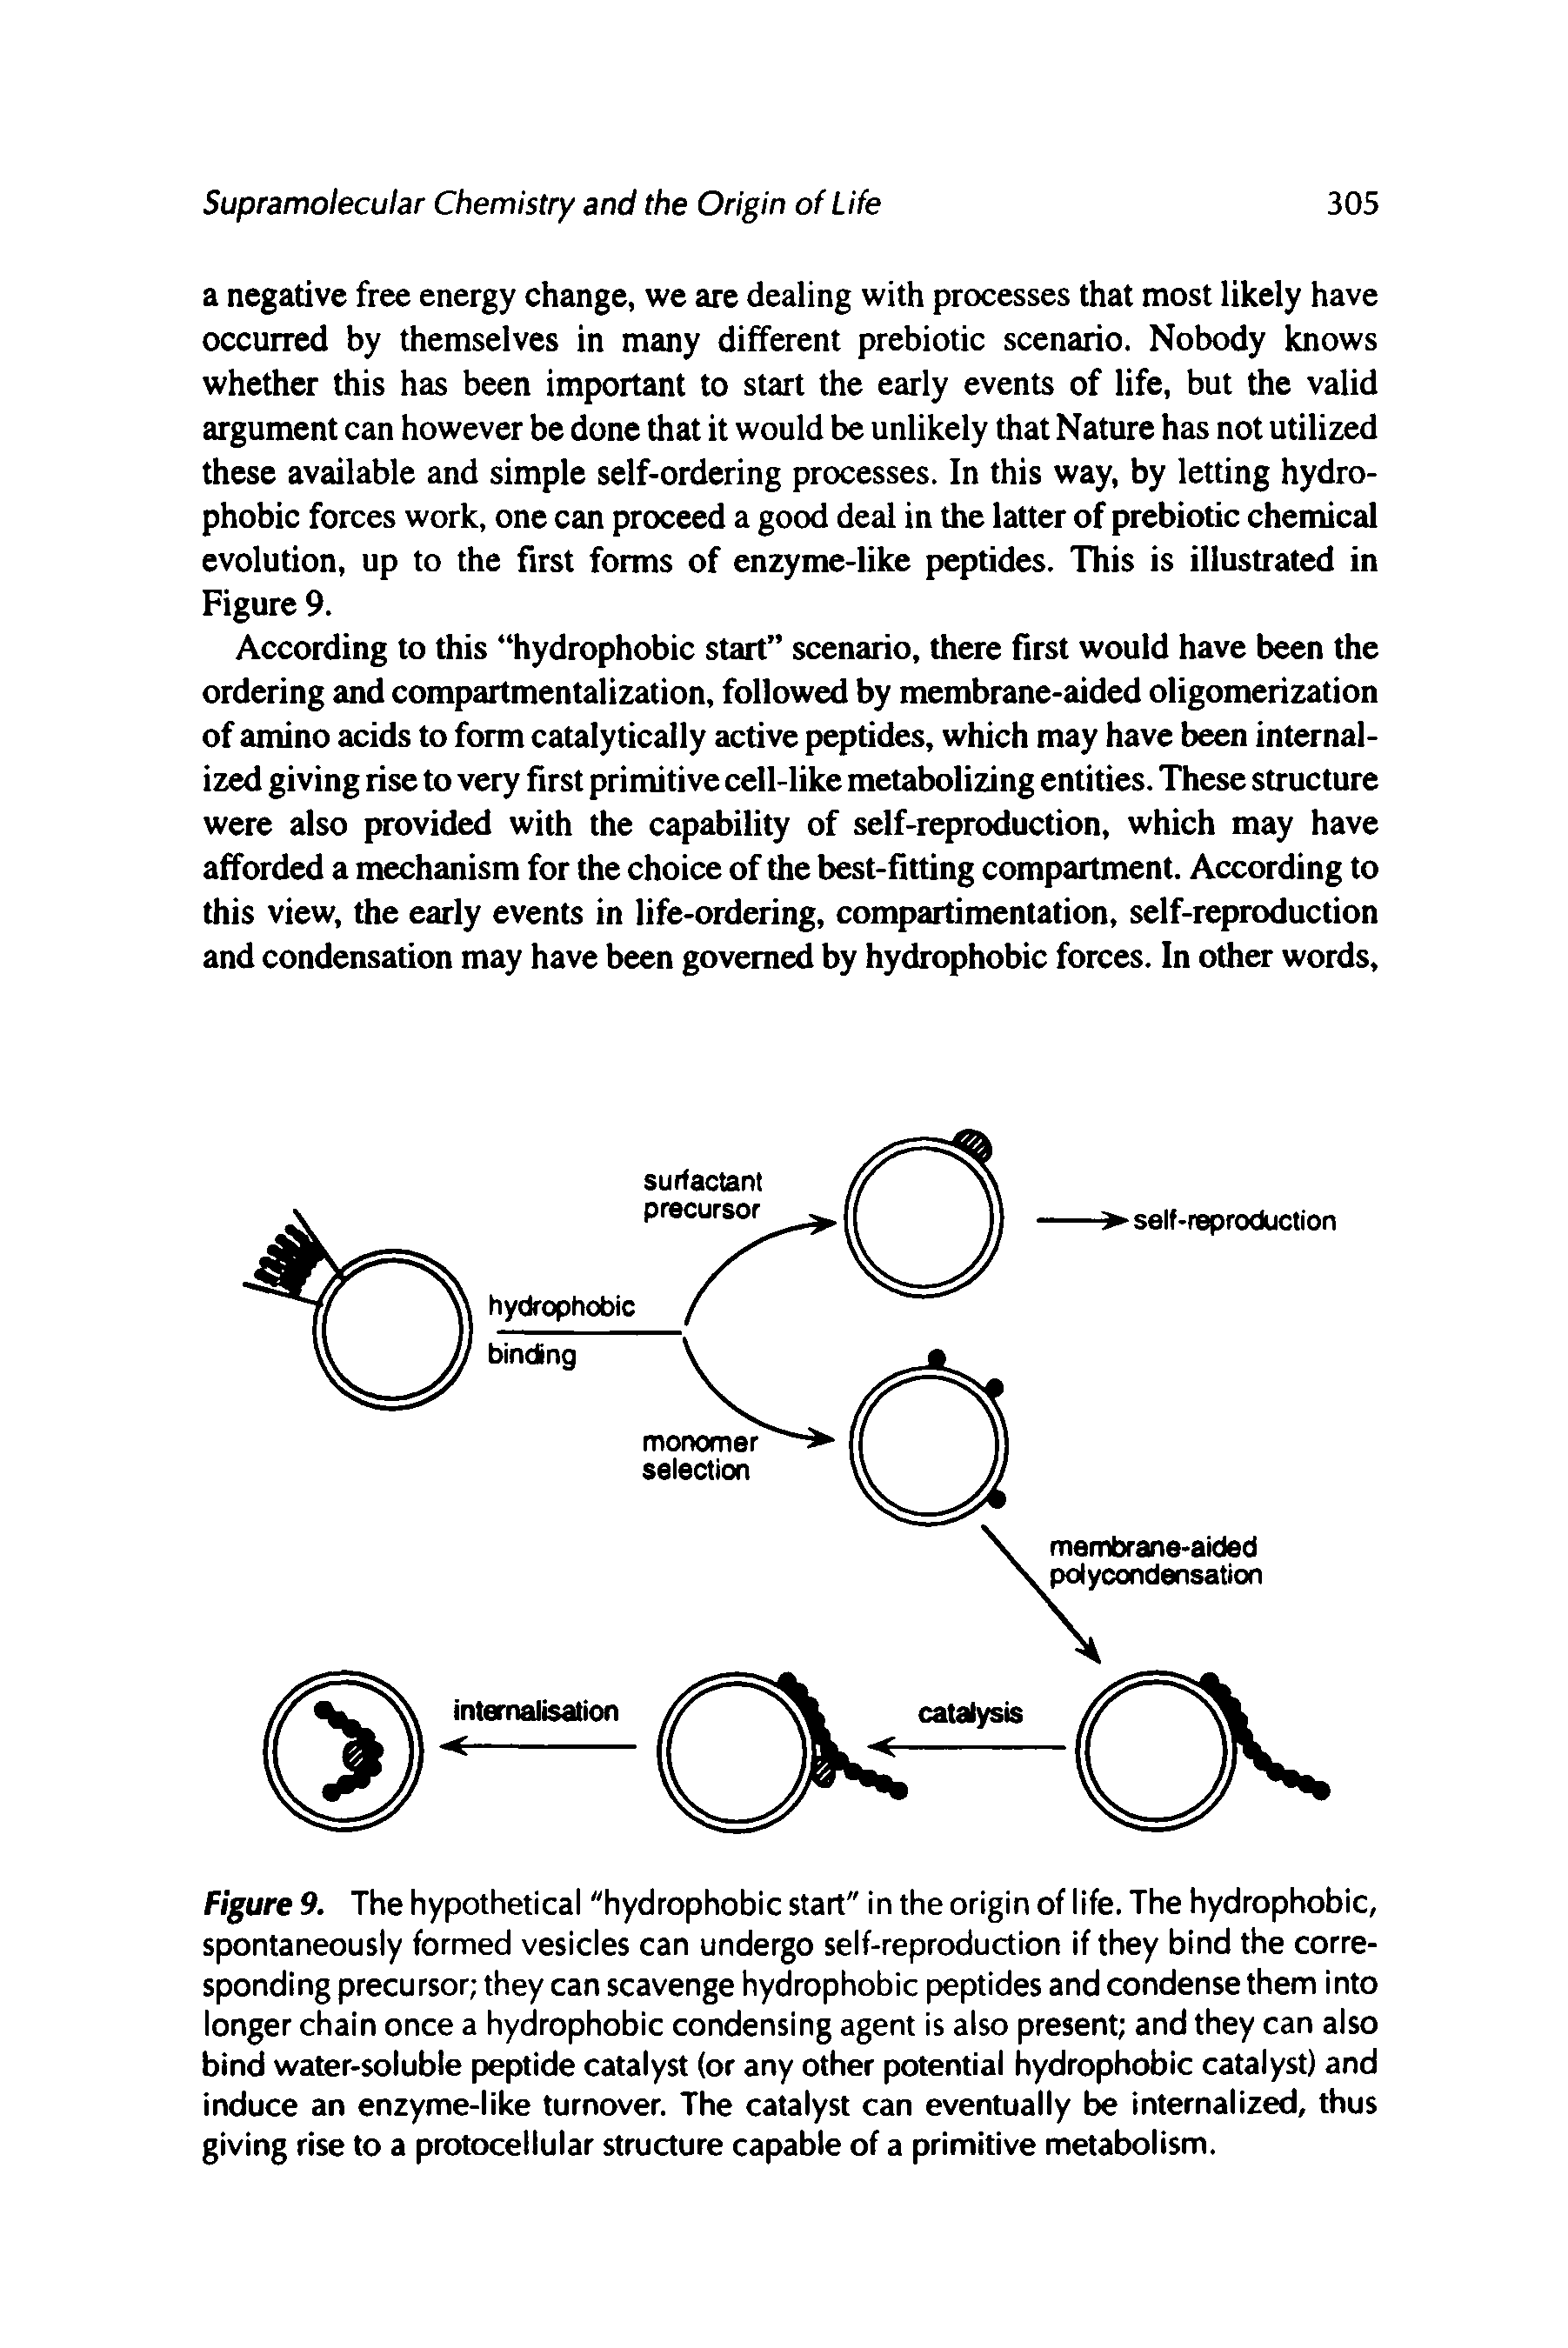 Figure 9. The hypothetical "hydrophobic start" in the origin of life. The hydrophobic, spontaneously formed vesicles can undergo self-reproduction if they bind the corresponding precursor they can scavenge hydrophobic peptides and condense them into longer chain once a hydrophobic condensing agent is also present and they can also bind water-soluble peptide catalyst (or any other potential hydrophobic catalyst) and induce an enzyme-like turnover. The catalyst can eventually be internalized, thus giving rise to a protocellular structure capable of a primitive metabolism.